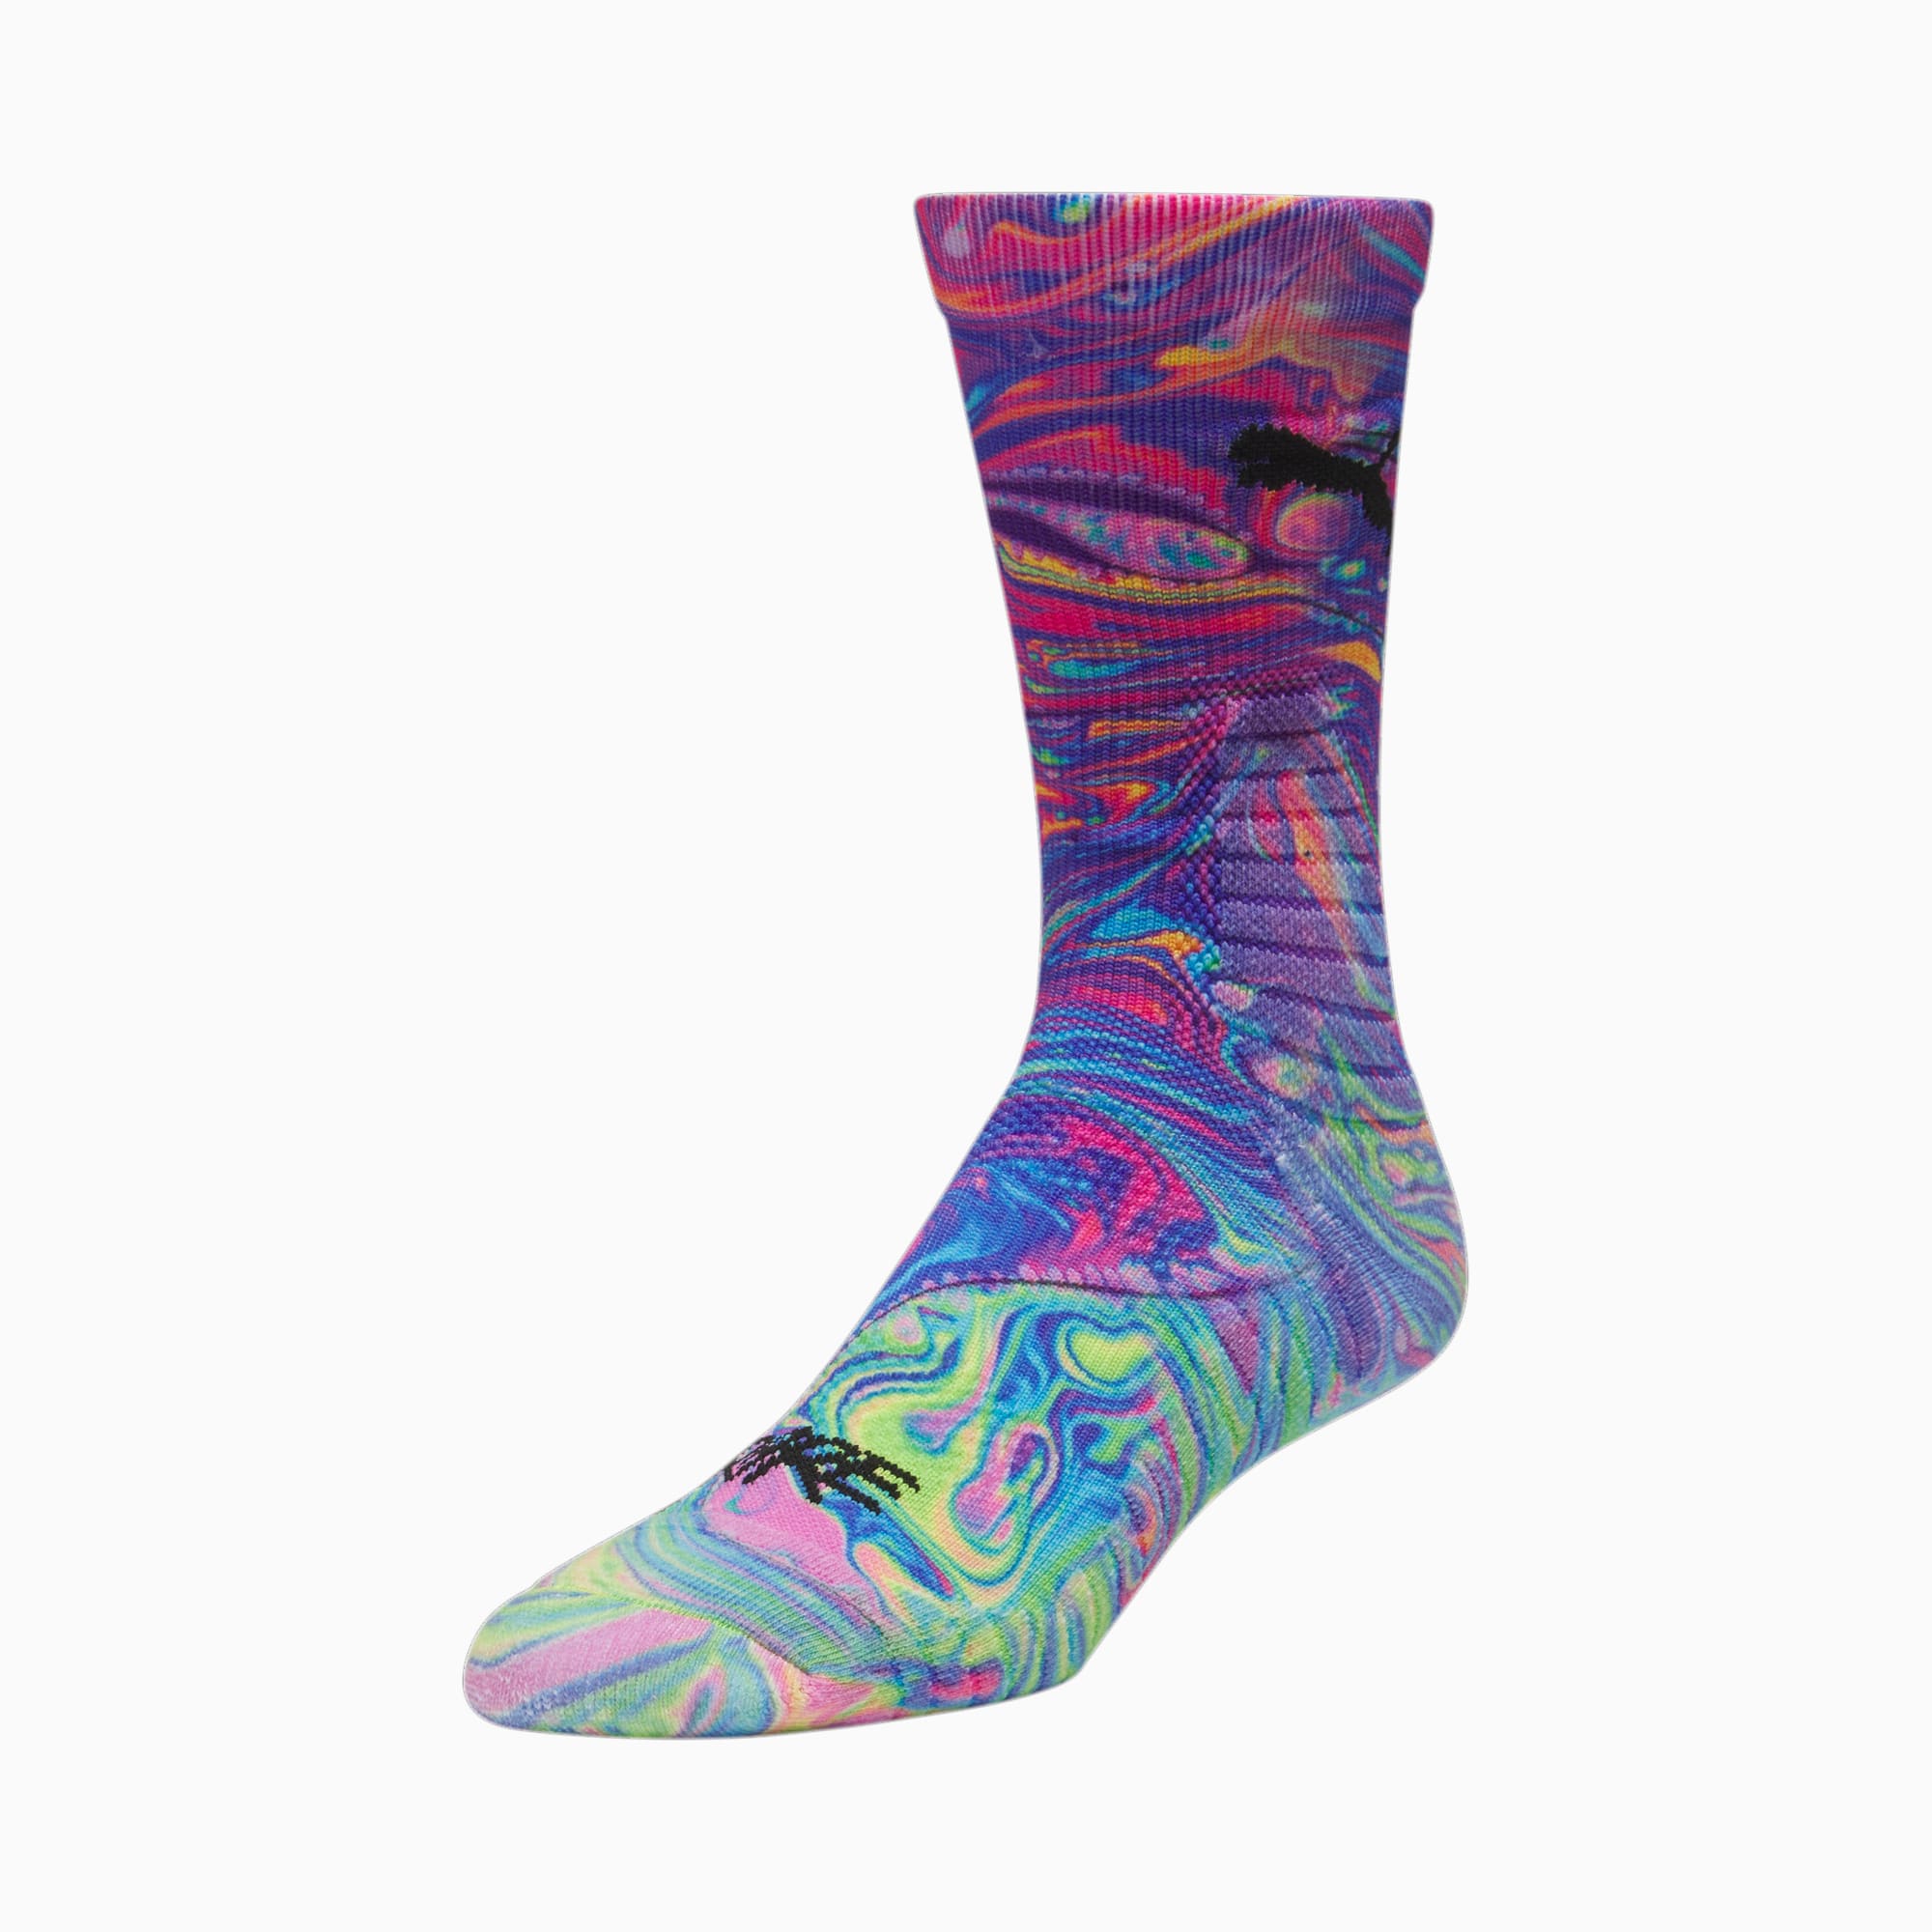 Lamelo Ball Socks for Sale by abstractoworld